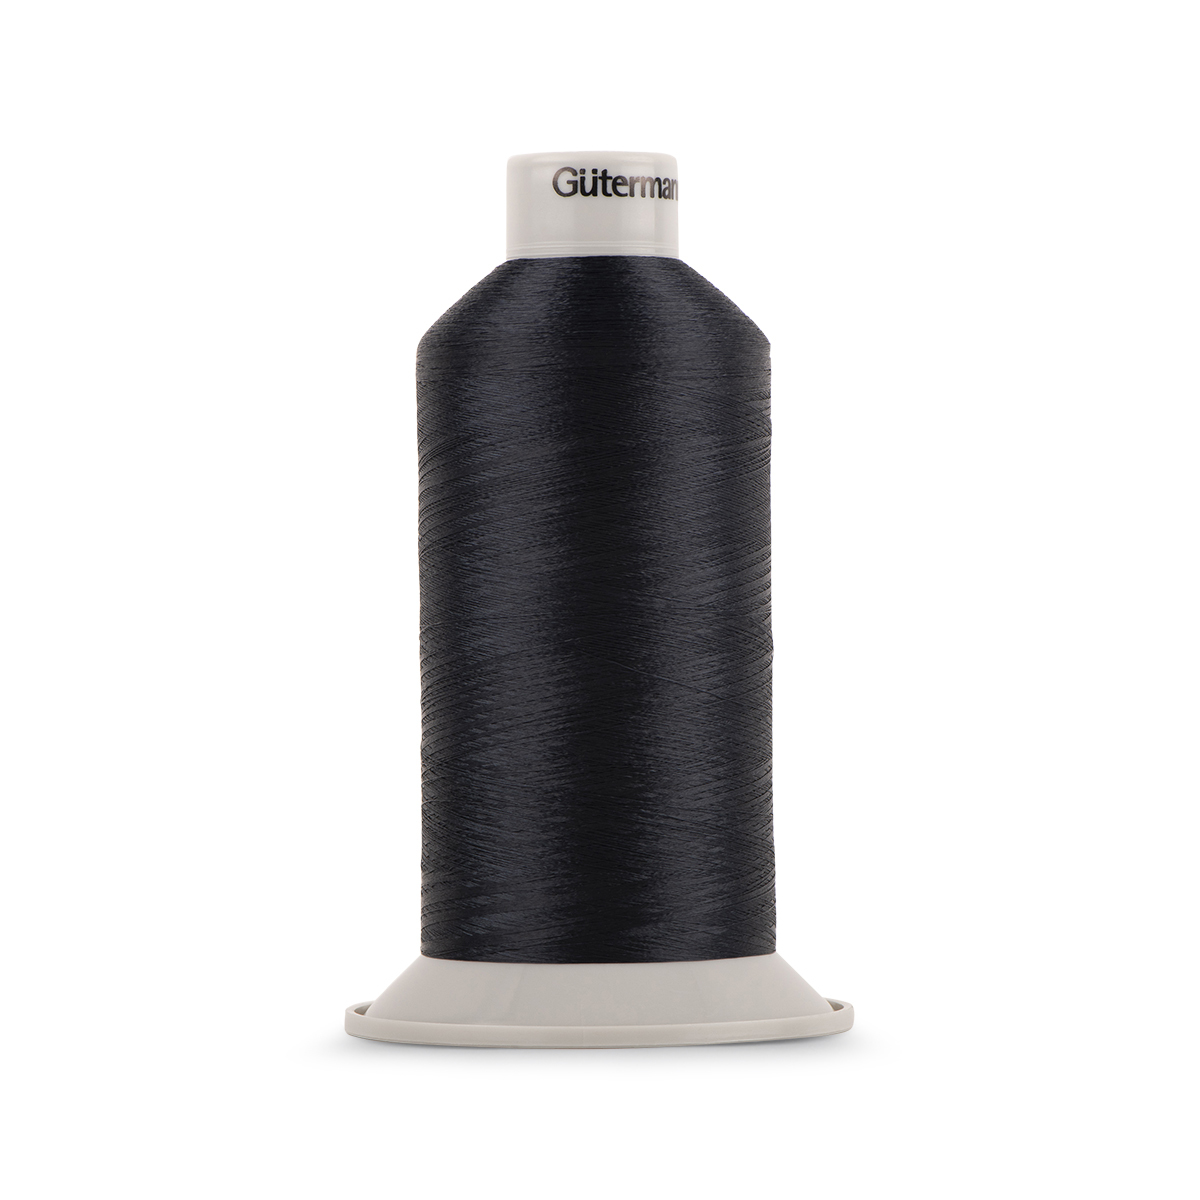 New 100% Polyester Standard Sewing thread each thread 200 Meters Black